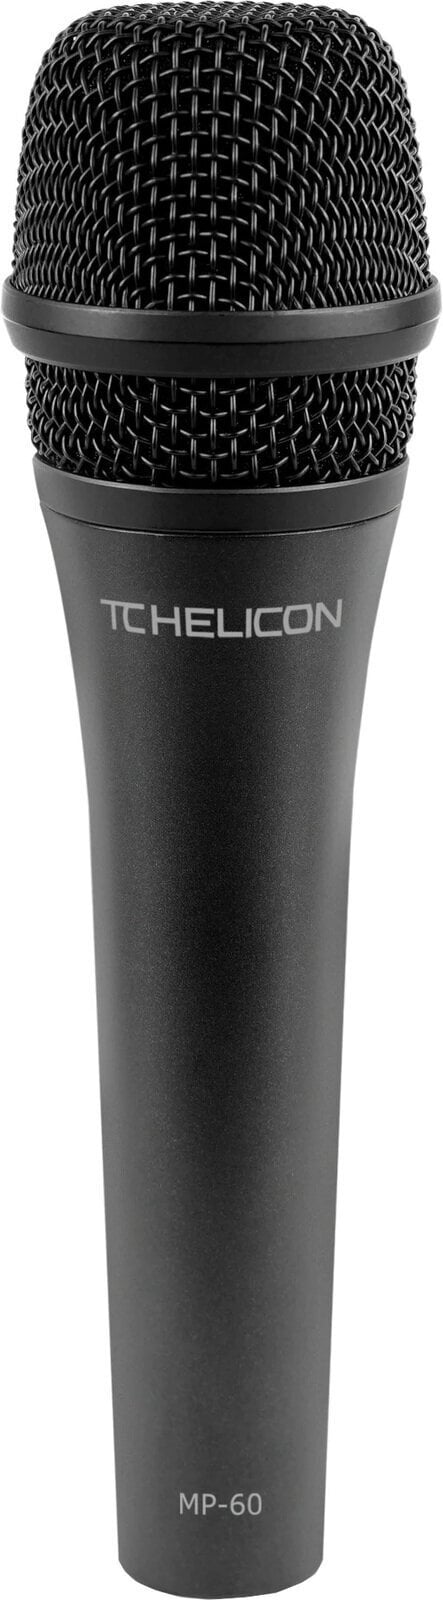 Vocal Dynamic Microphone TC Helicon MP 60 Vocal Dynamic Microphone